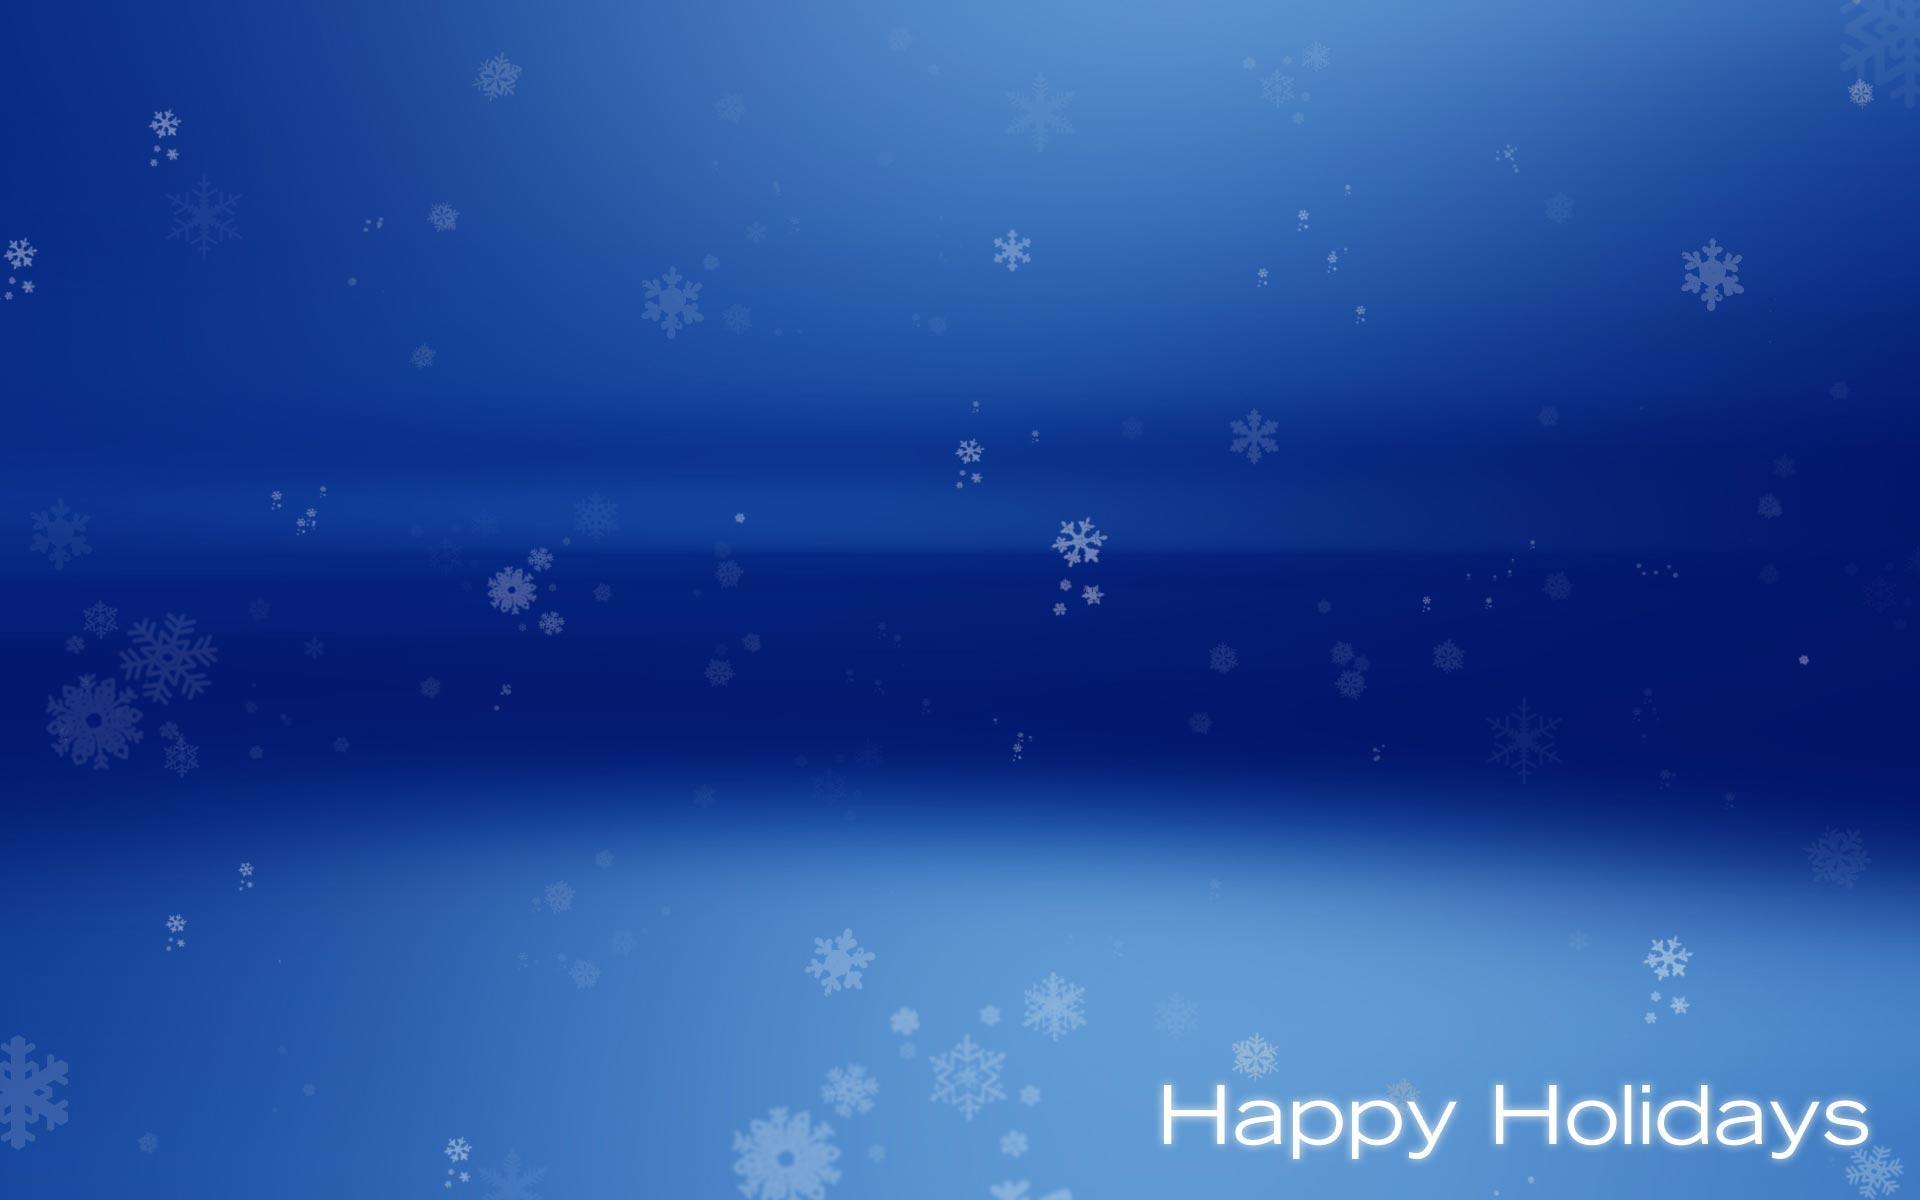 holiday wallpaper background 2015